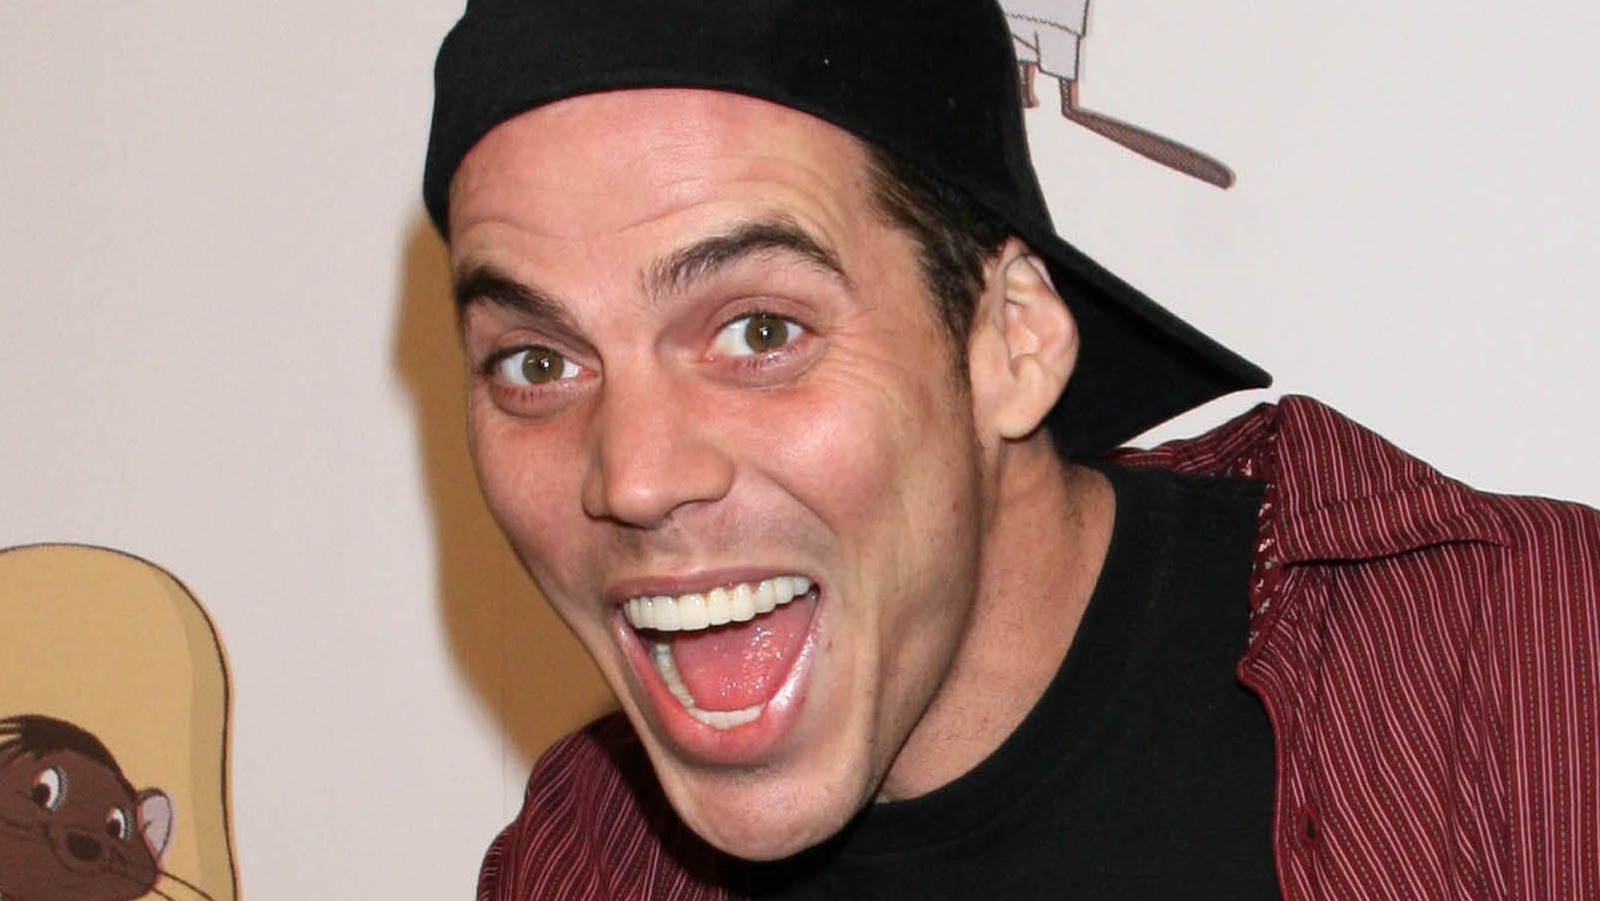 Steve-O Confirms What We Suspected All Along About Jackass Stunts Too Viole...